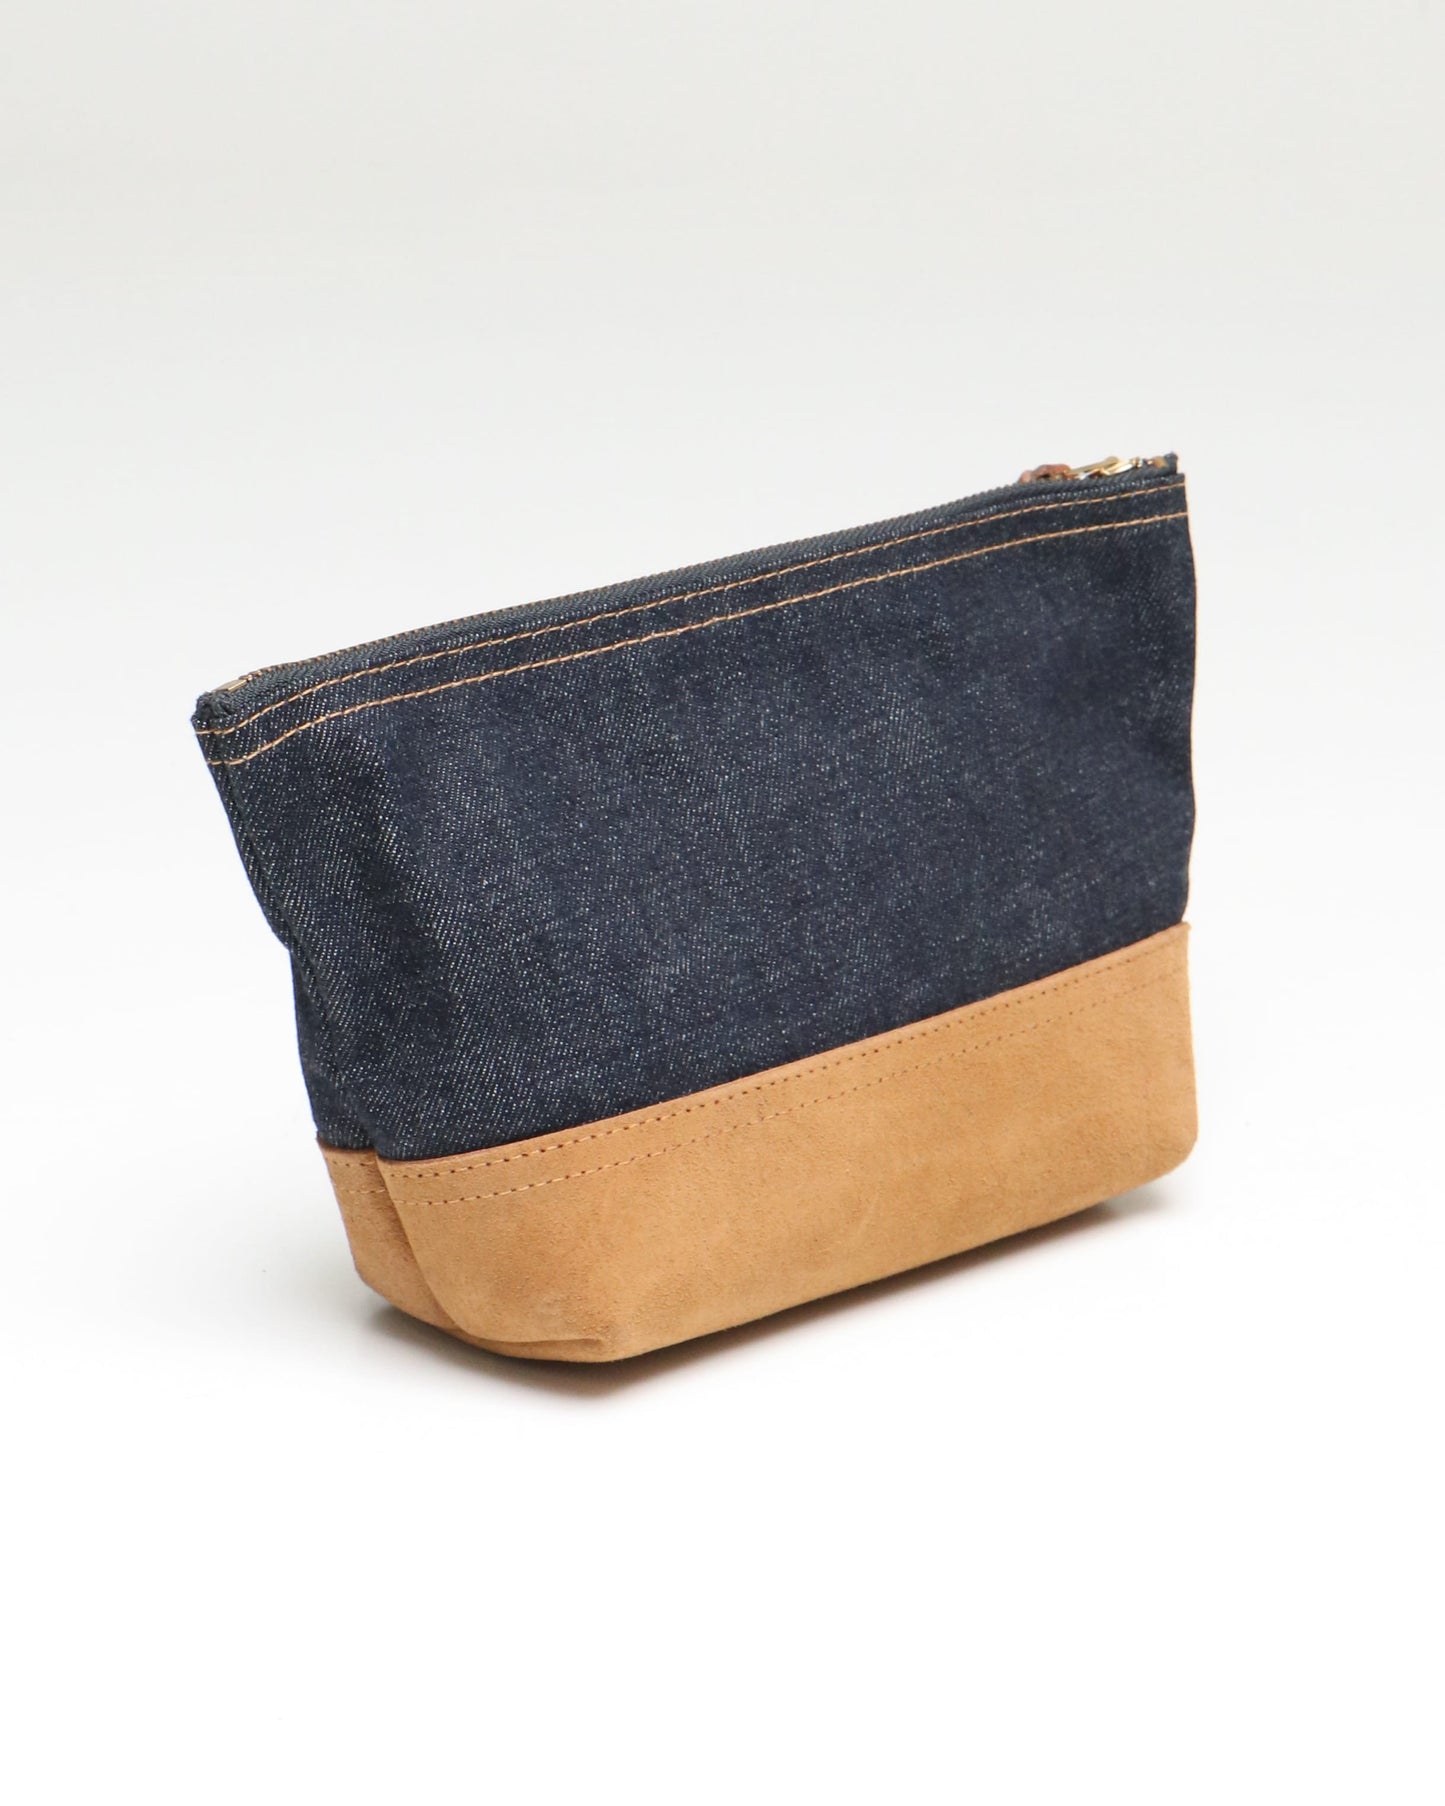 LG GUSSET-POUCH